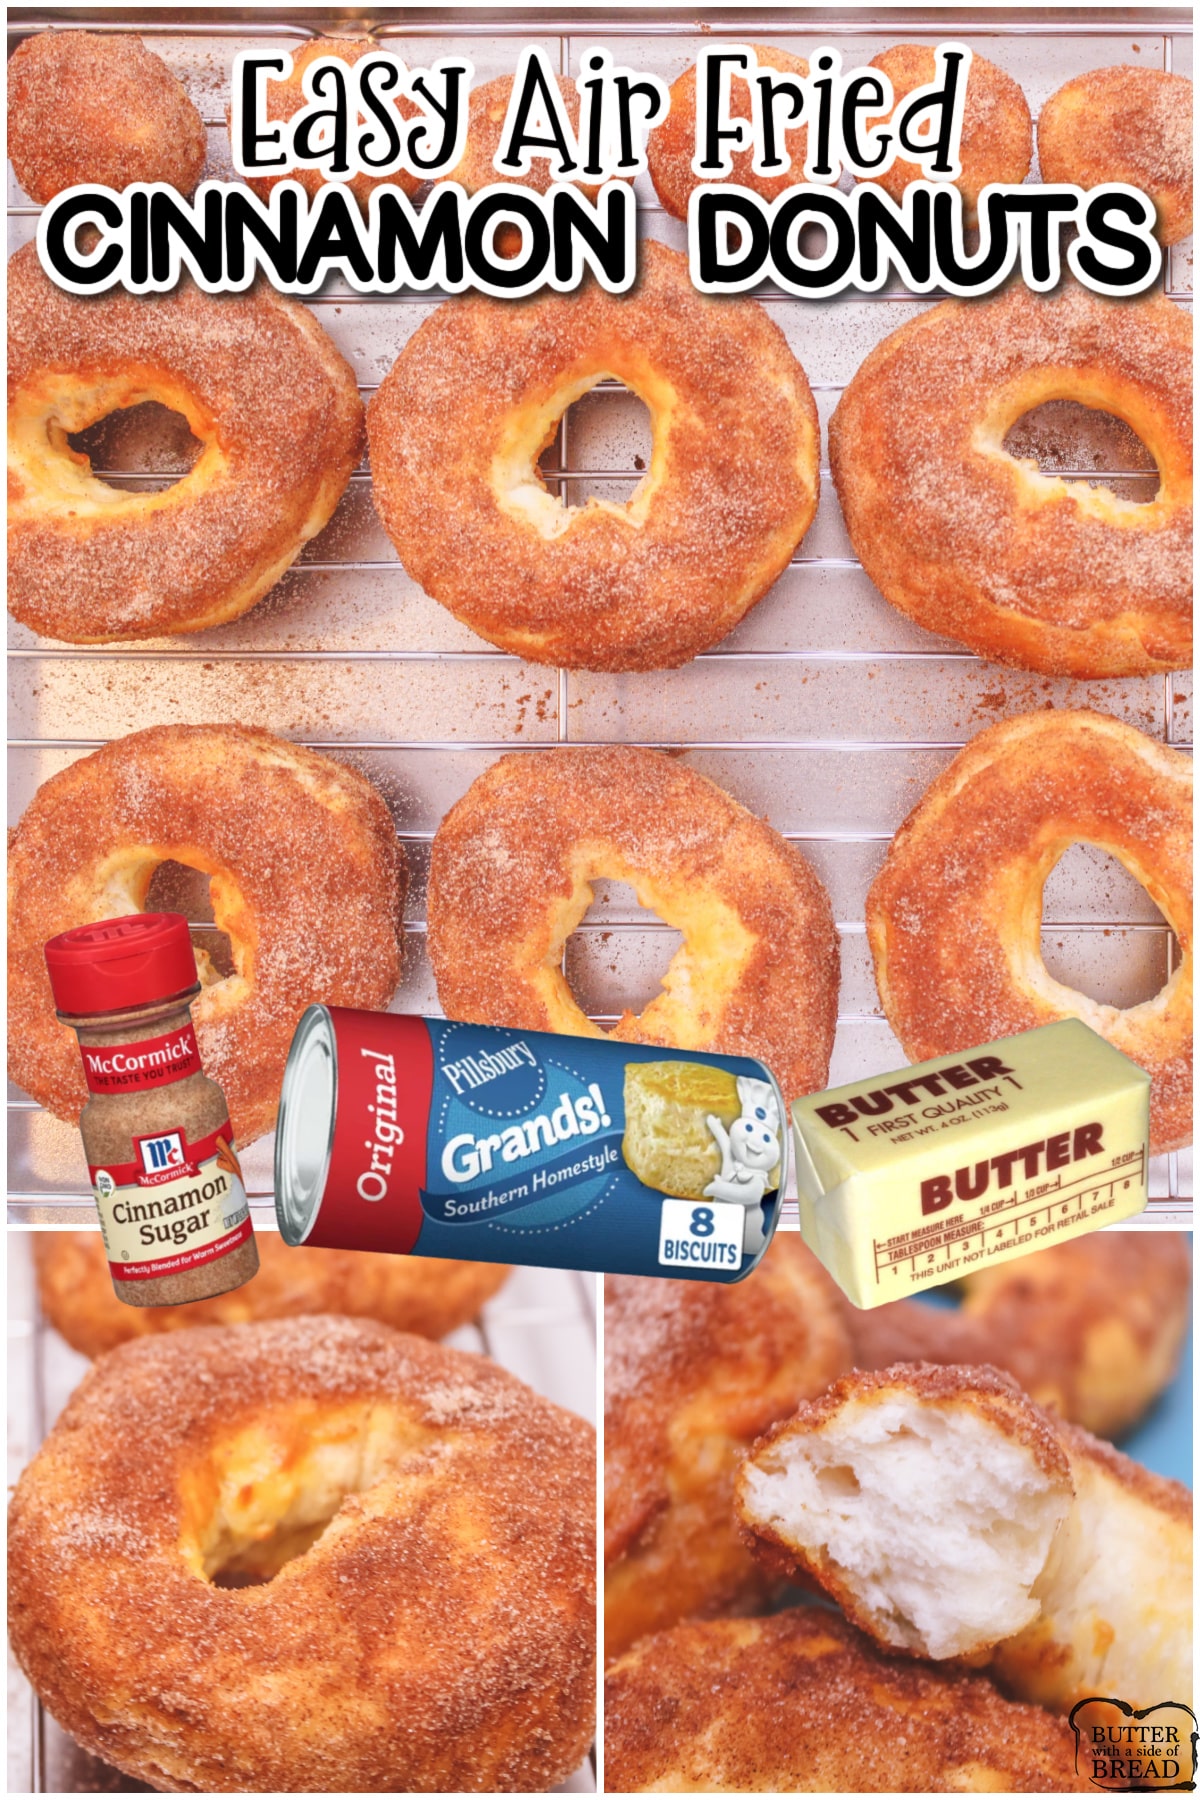 Easy Cinnamon Donuts are a simple and delightful treat, made with only 4 ingredients! These air fryer cinnamon donuts are made with a can of biscuit dough, making this a great treat to whip up in the morning.